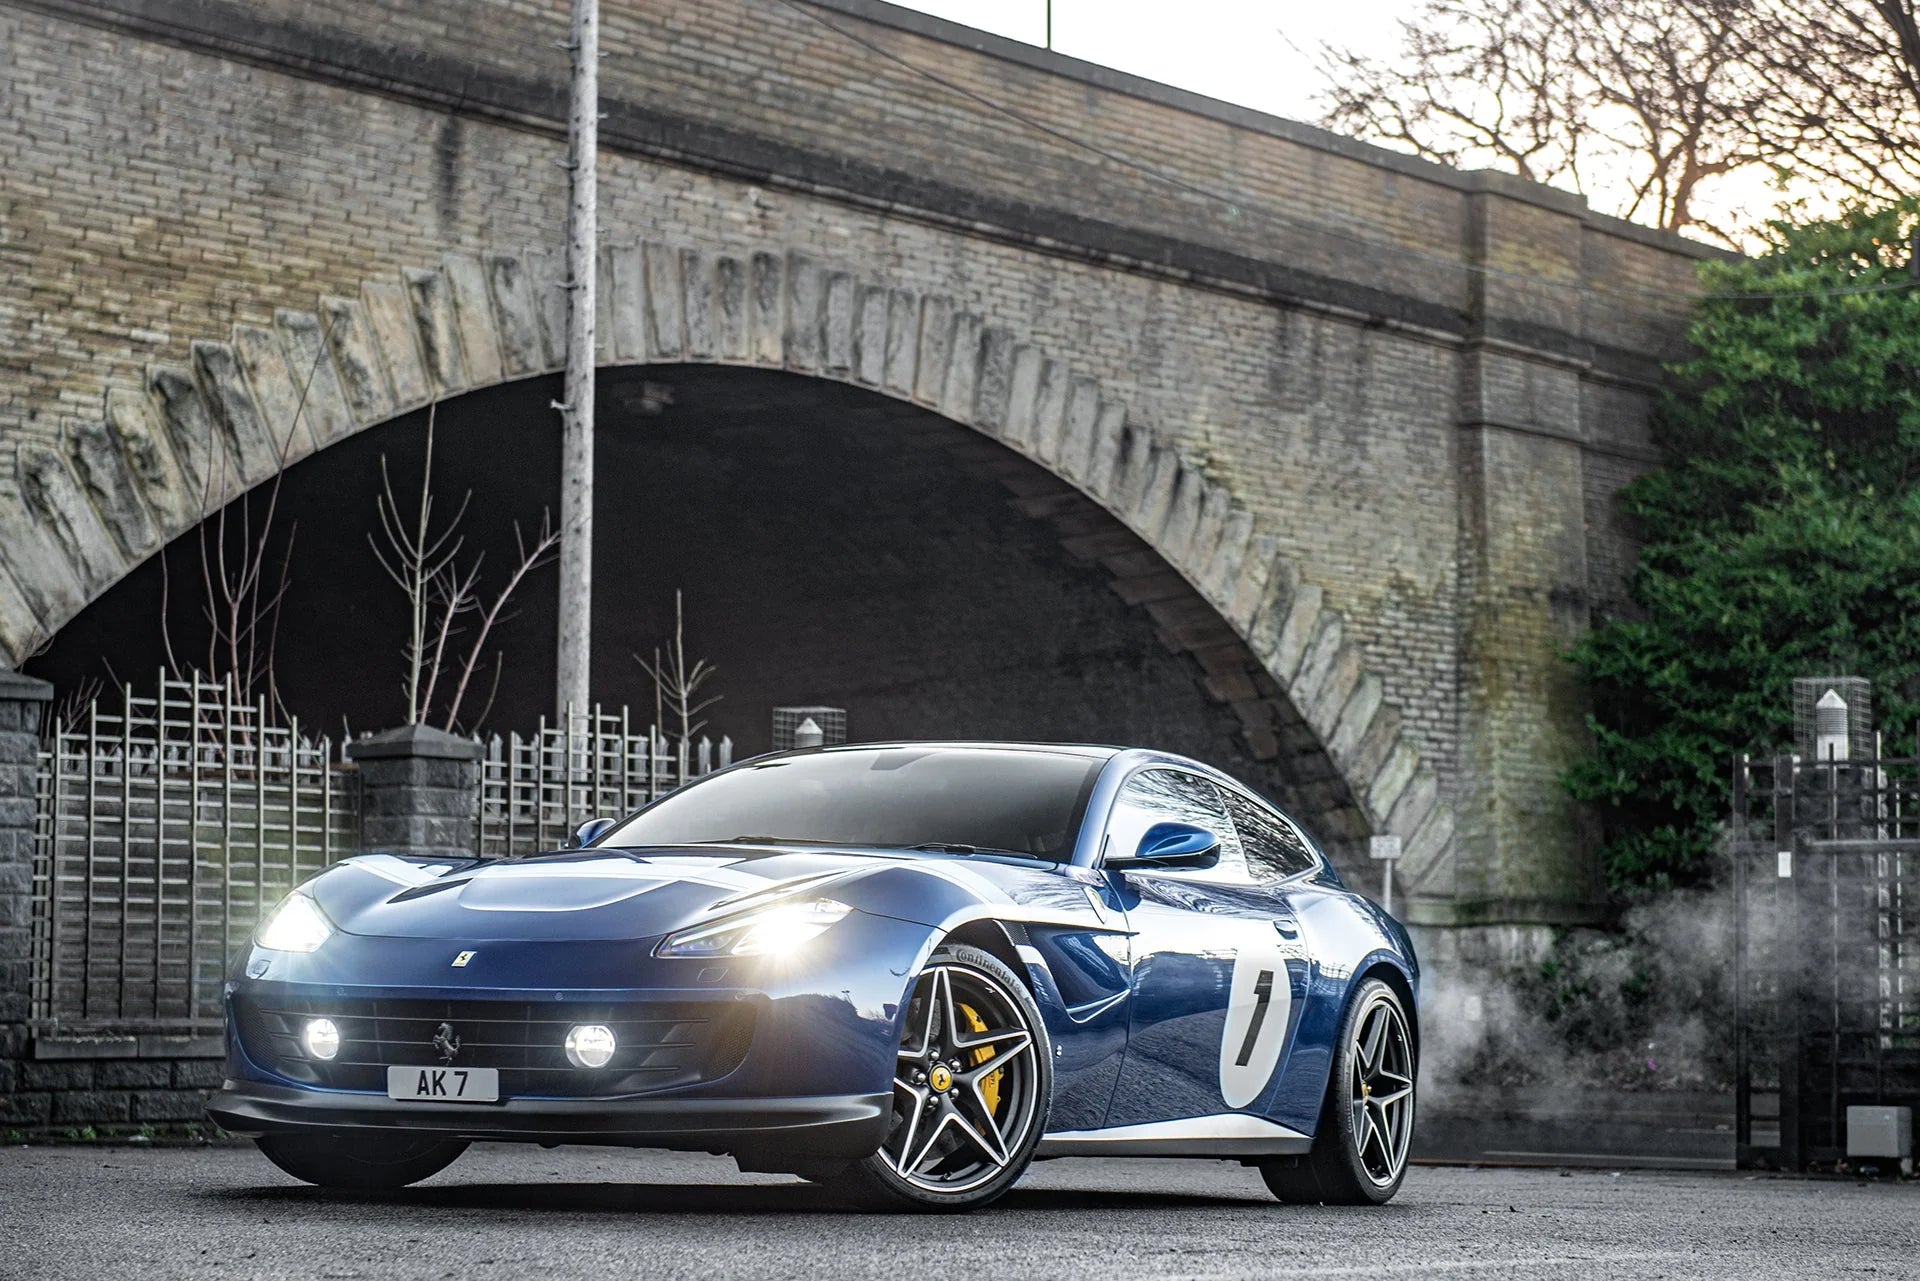 TAILOR-MADE: GTC4LUSSO // PK - 02